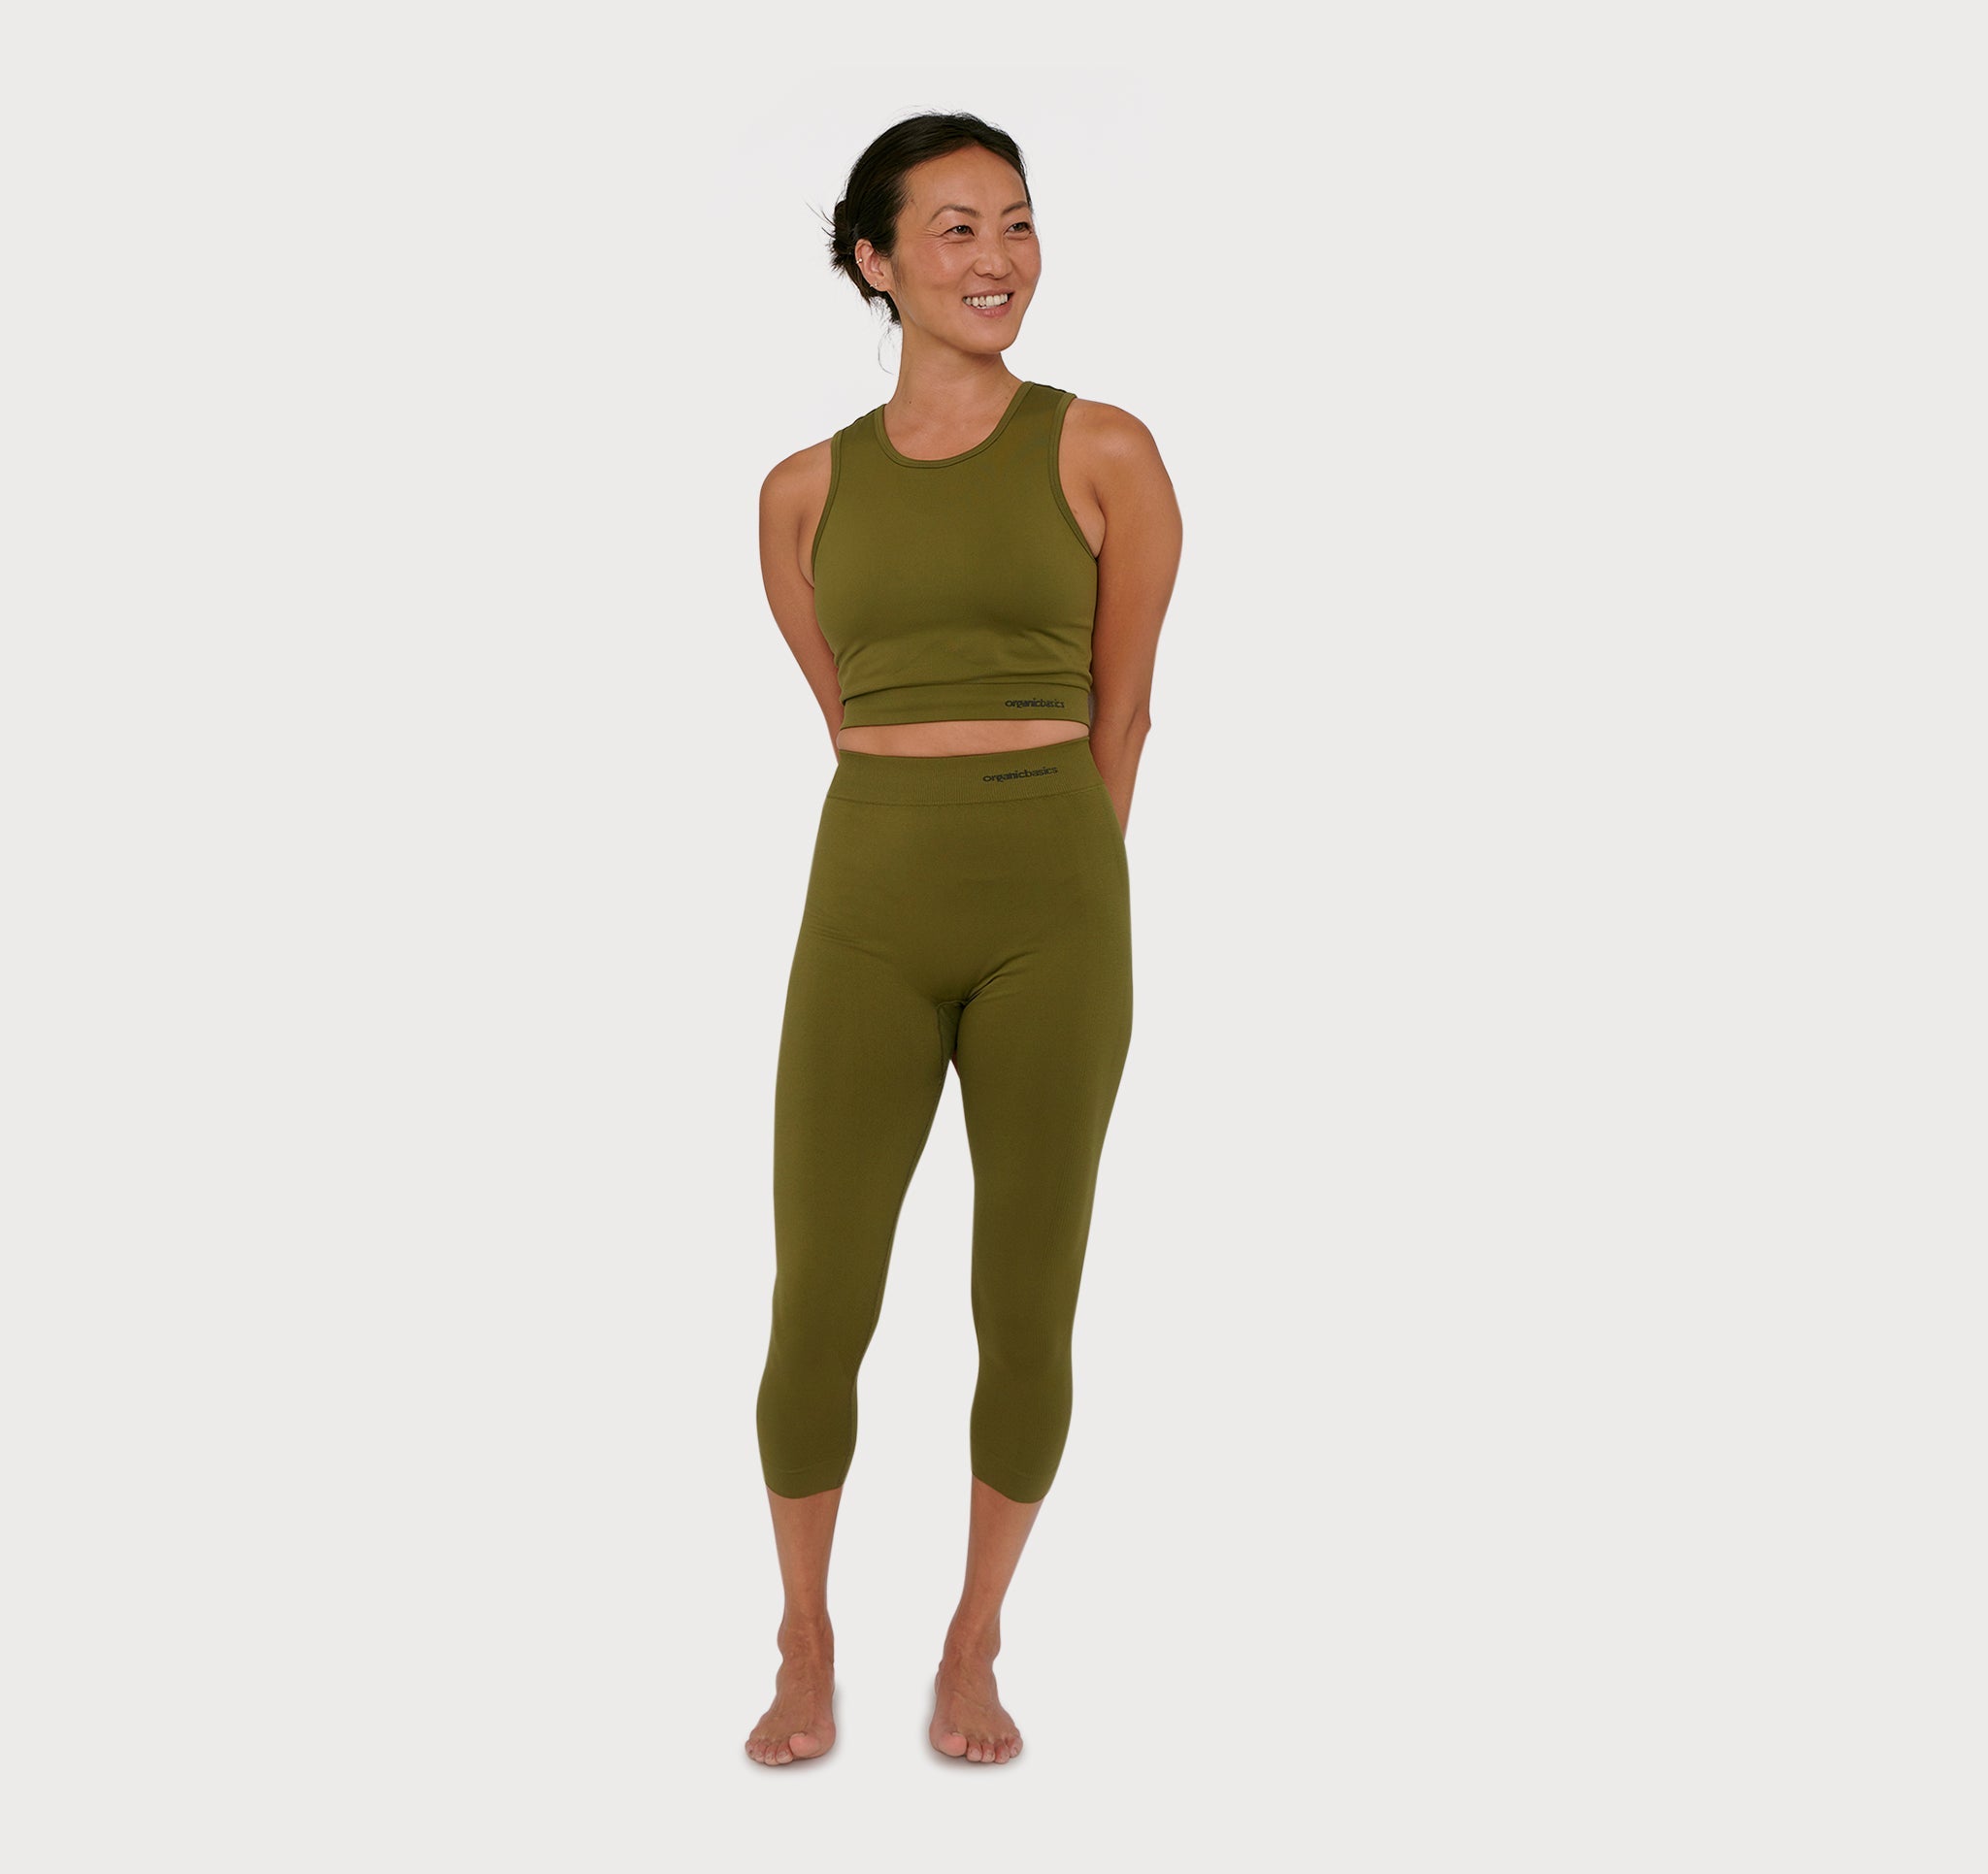 Army Green Seamless High Waist Yoga Set For Women Hollow Out Fitness  Clothes Women For Gym And Workouts From Qackwang, $17.07 | DHgate.Com